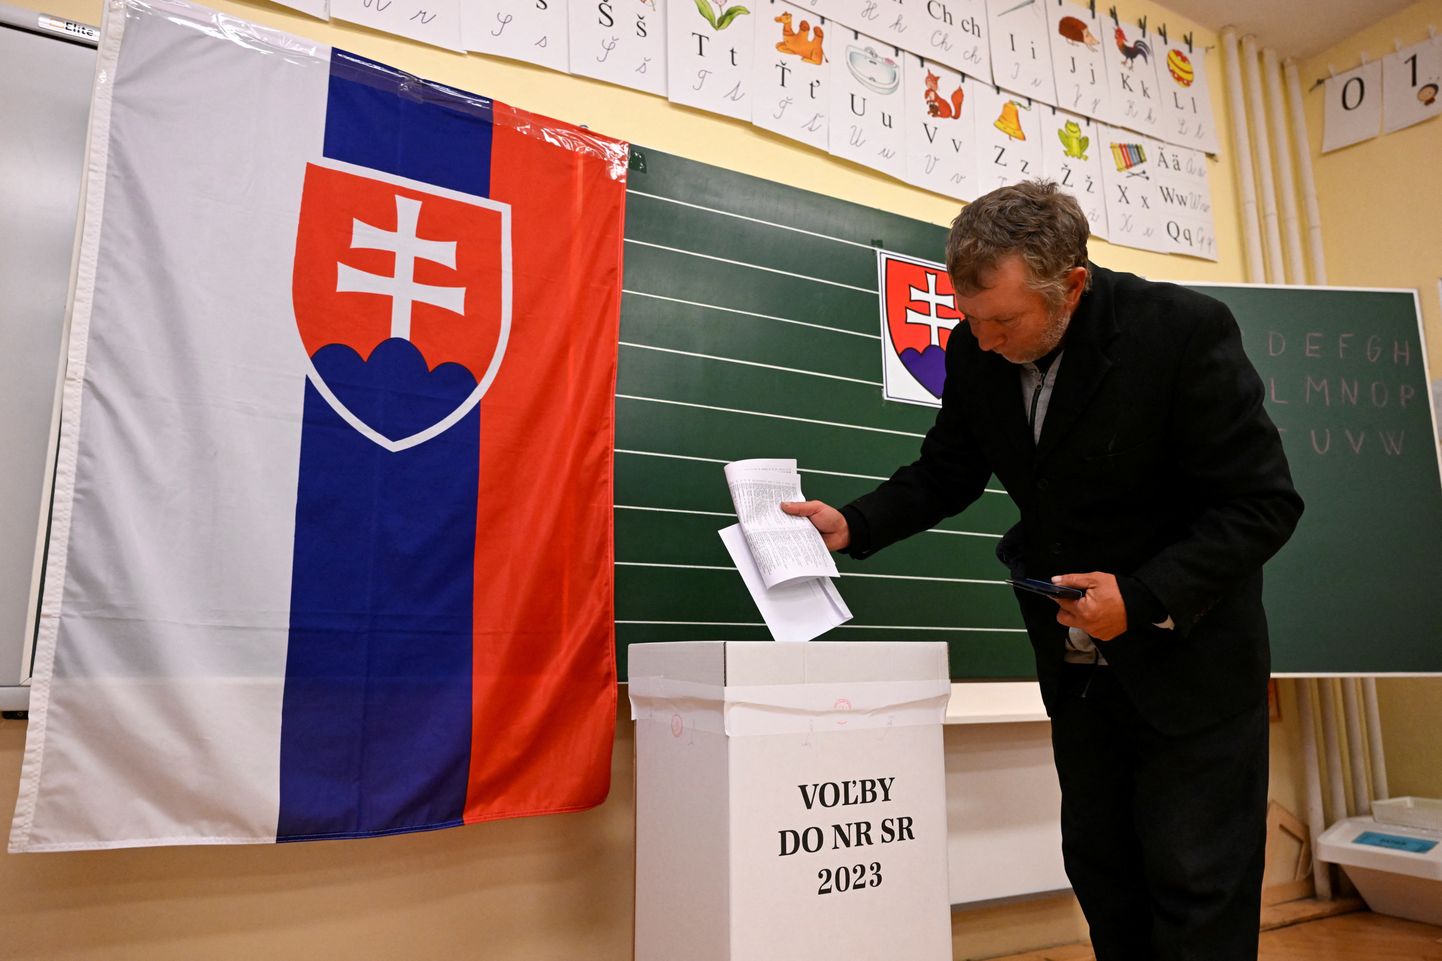 A person casts a ballot at a polling station during the country's early parliamentary election in Trencianske Stankovce, Slovakia, September 30, 2023. REUTERS/Radovan Stoklasa